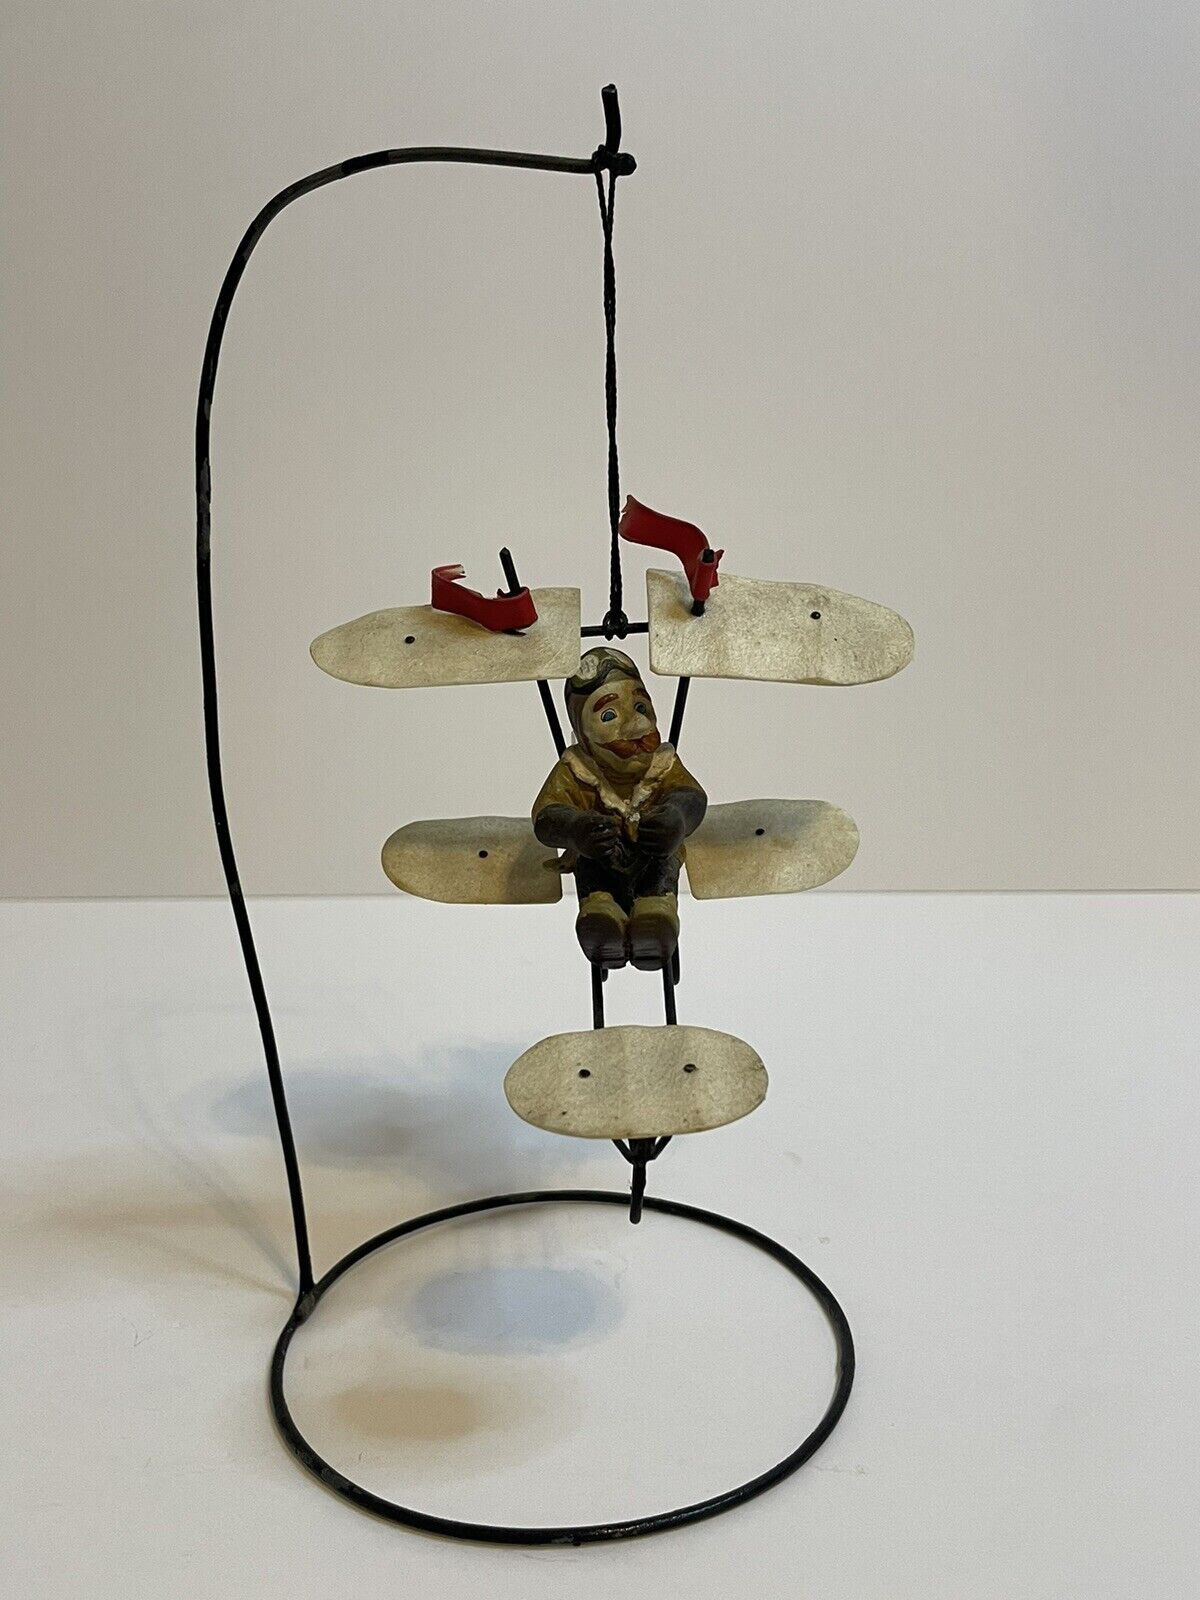 Vintage Hanging Pedal Airplane Decoration, Handmade in Phillipines